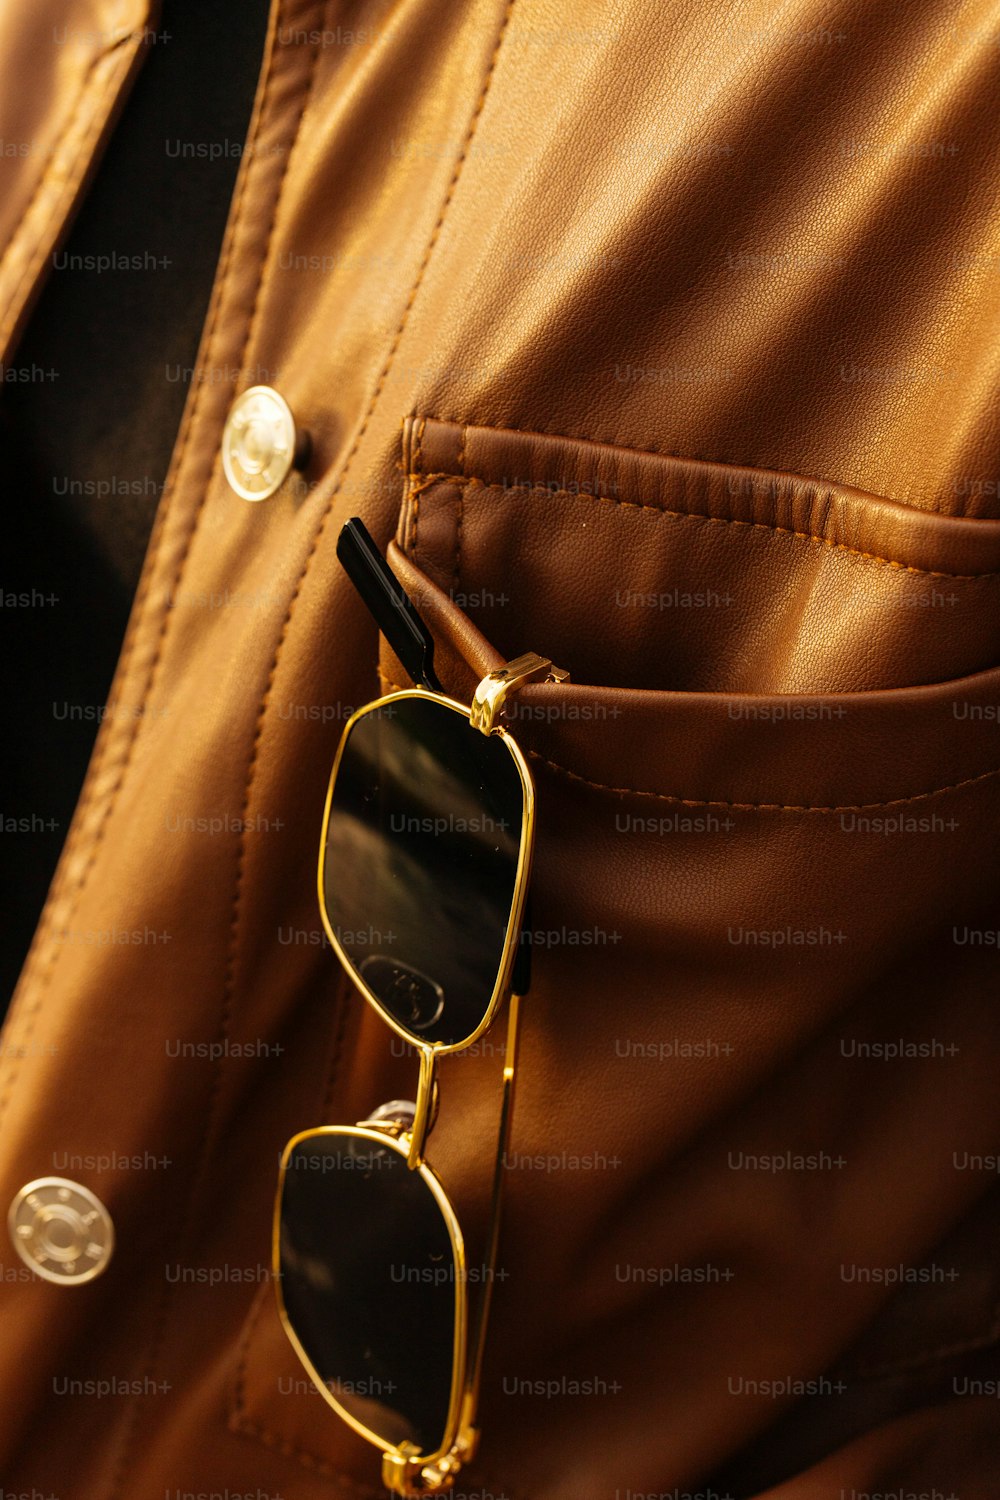 a close up of a pair of sunglasses in a pocket